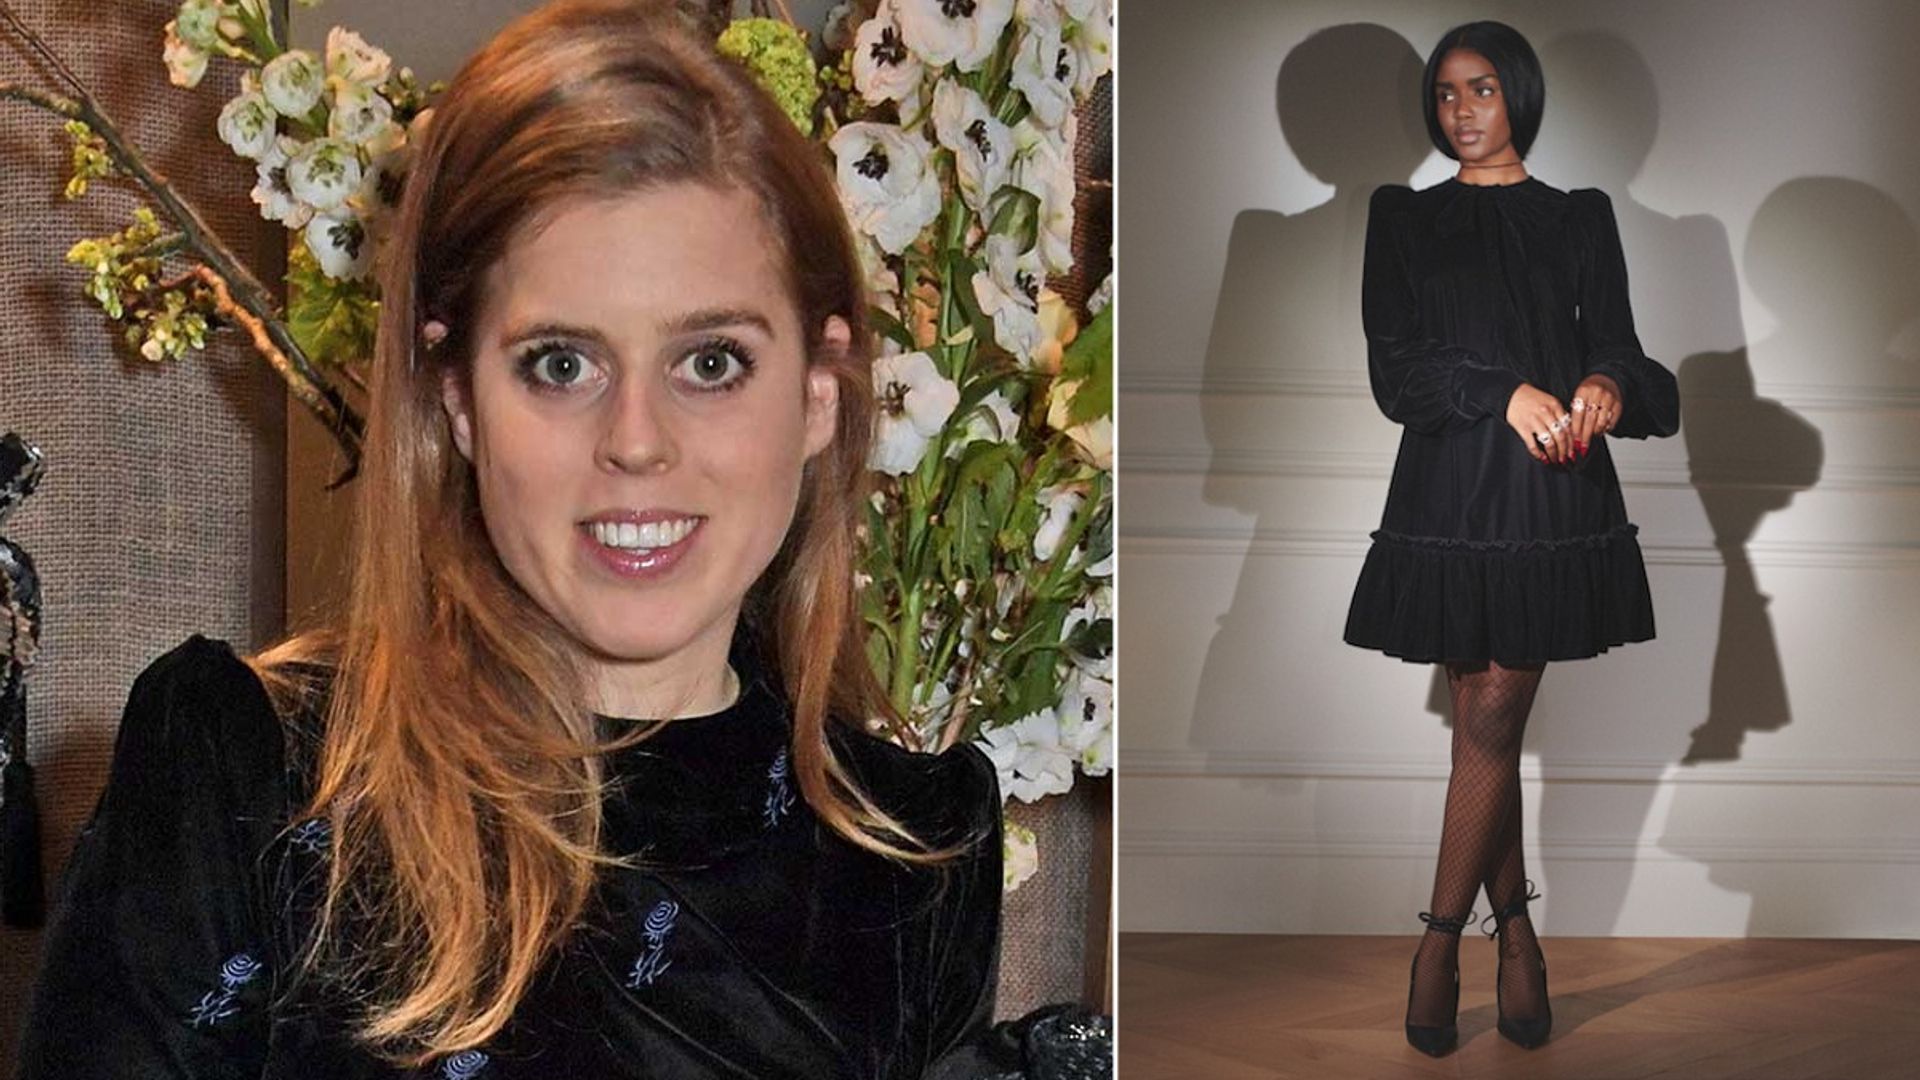 H&M's The Vampire's Wife collection has Princess Beatrice written all over it - and it's selling FAST